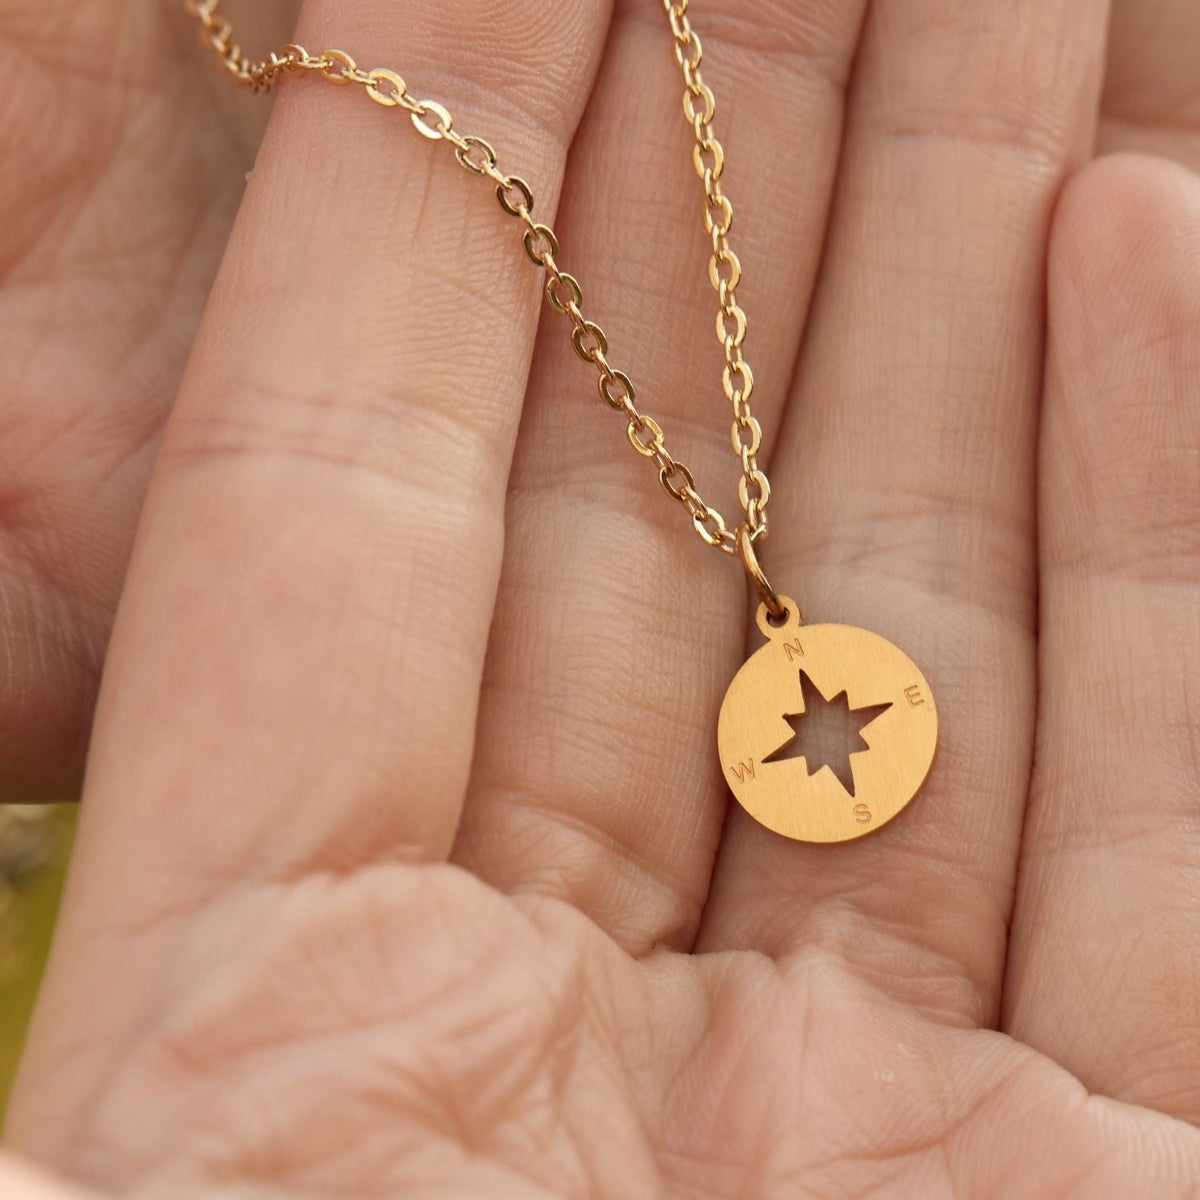 In Loving Memory of your Father | Loved Beyond Words | Compass Necklace